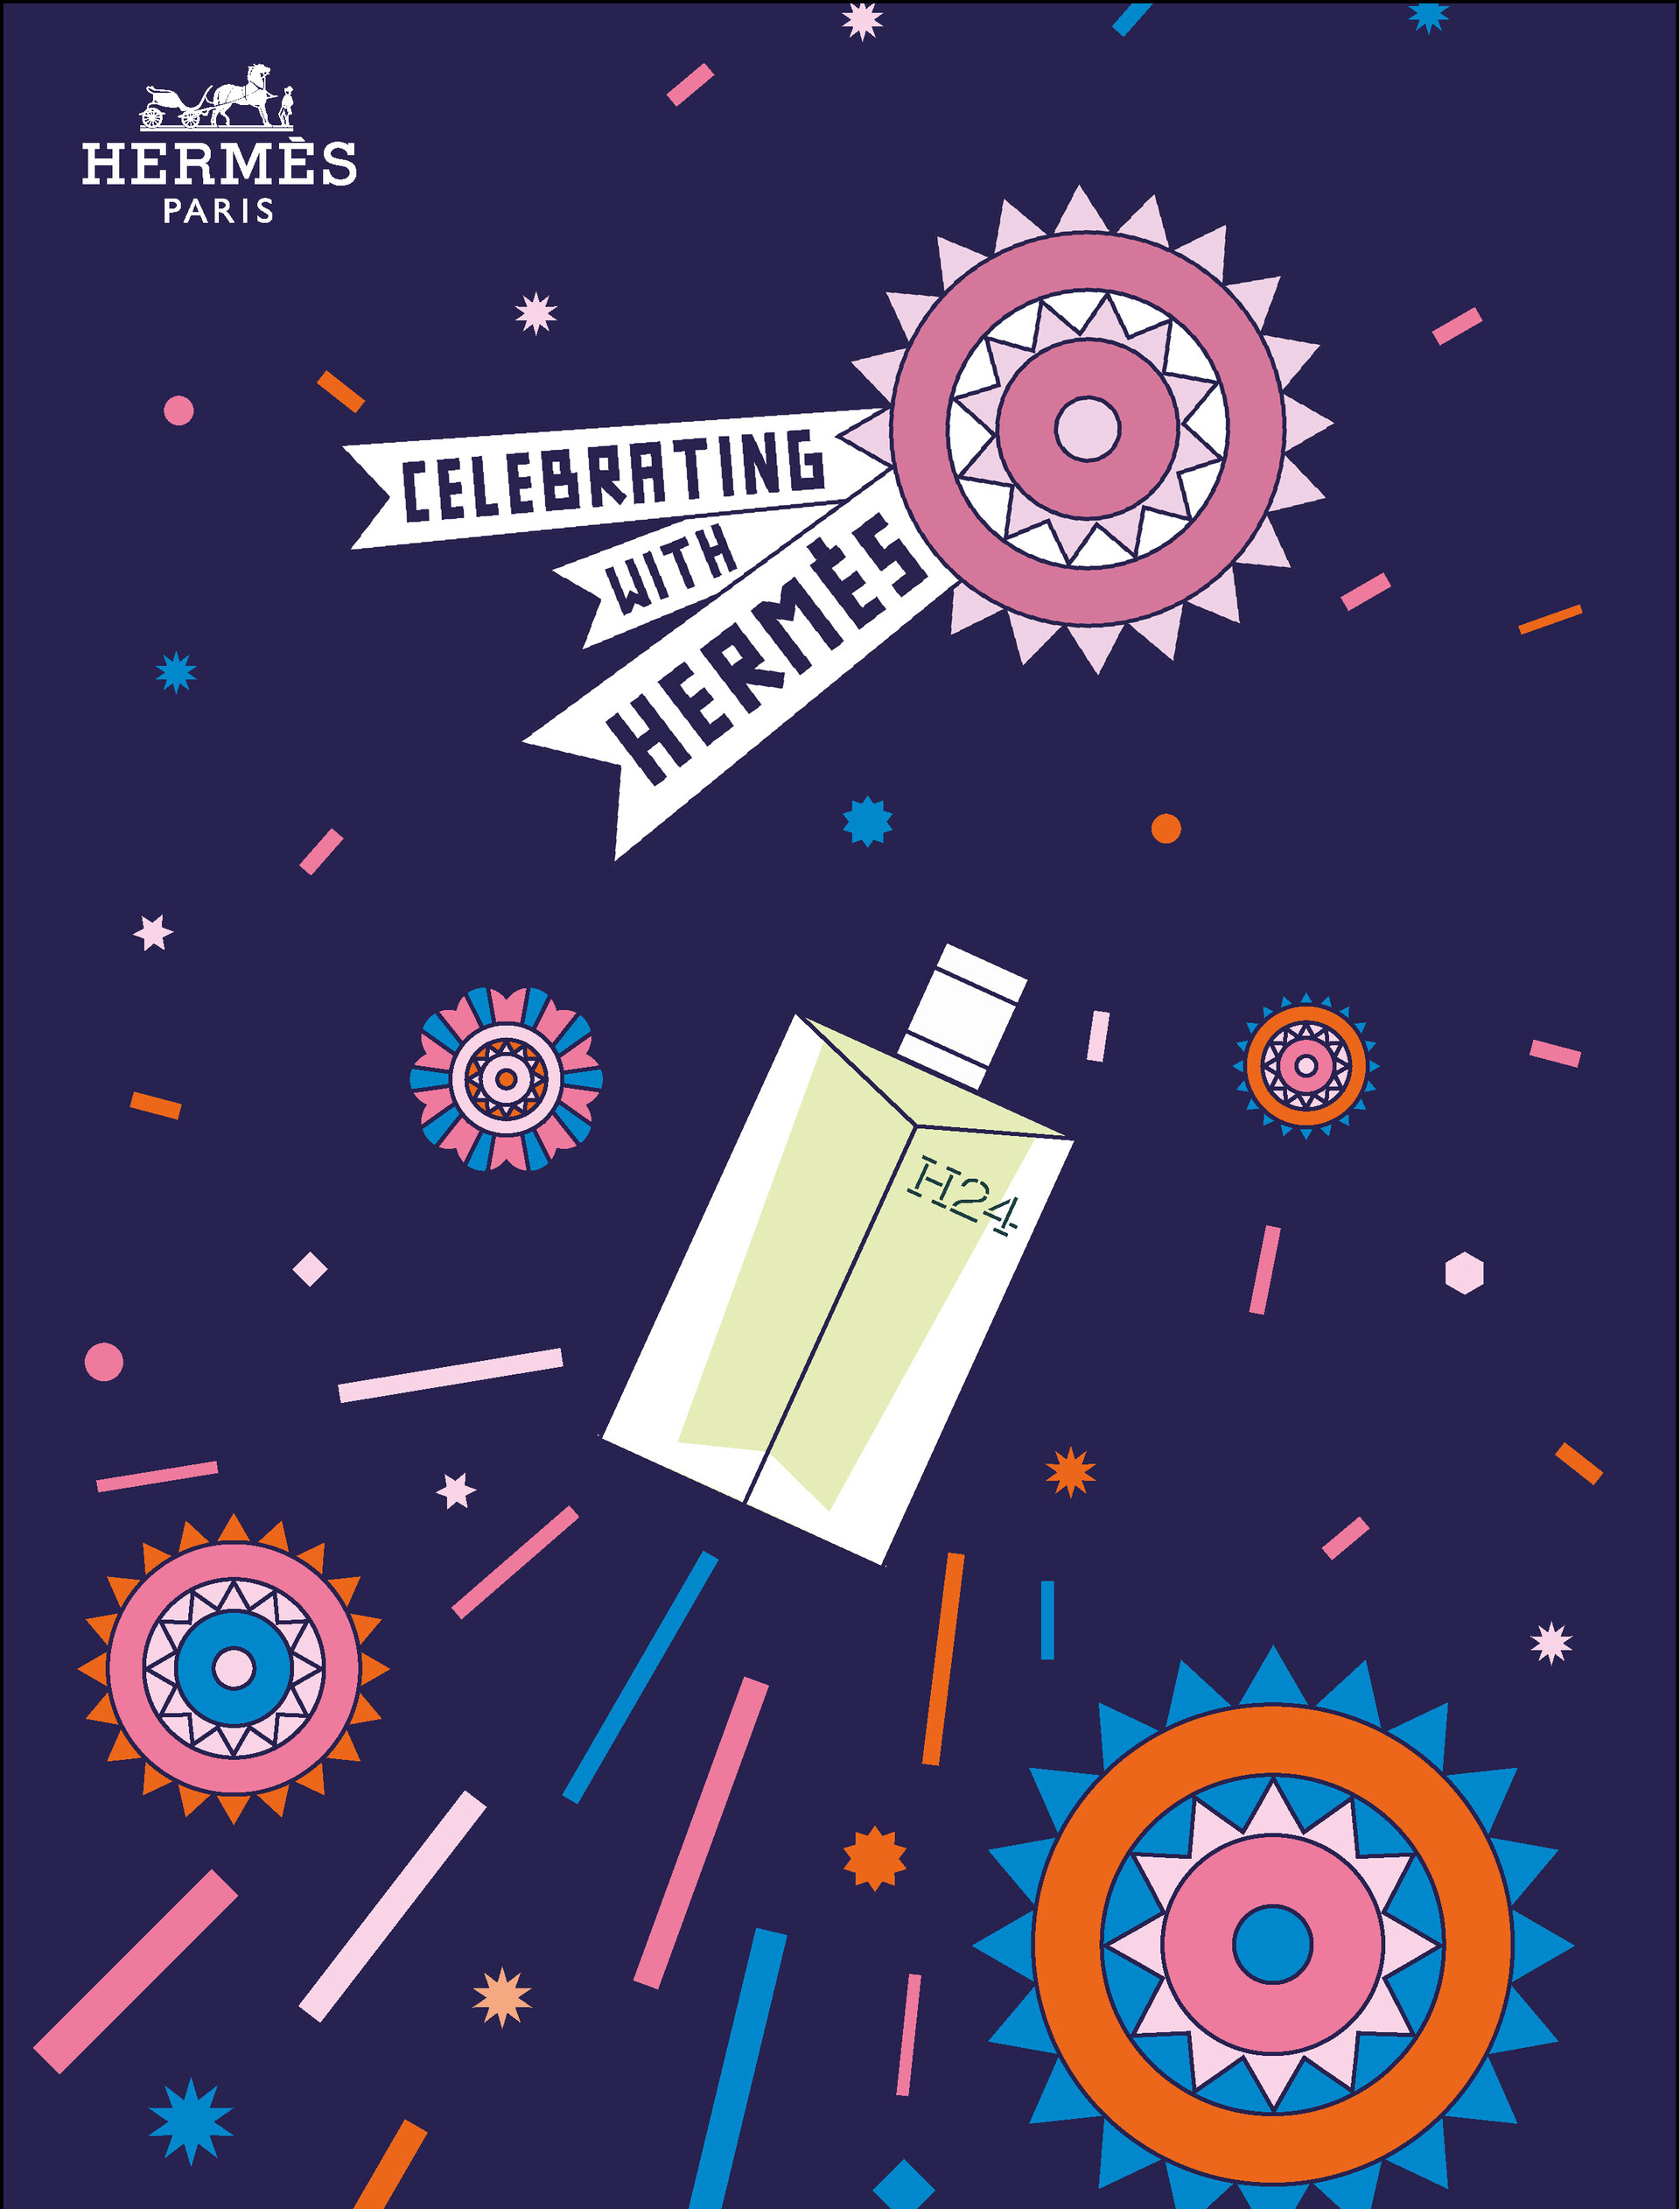 Celebrating with Hermès, perfume and beauty campaign, 2022